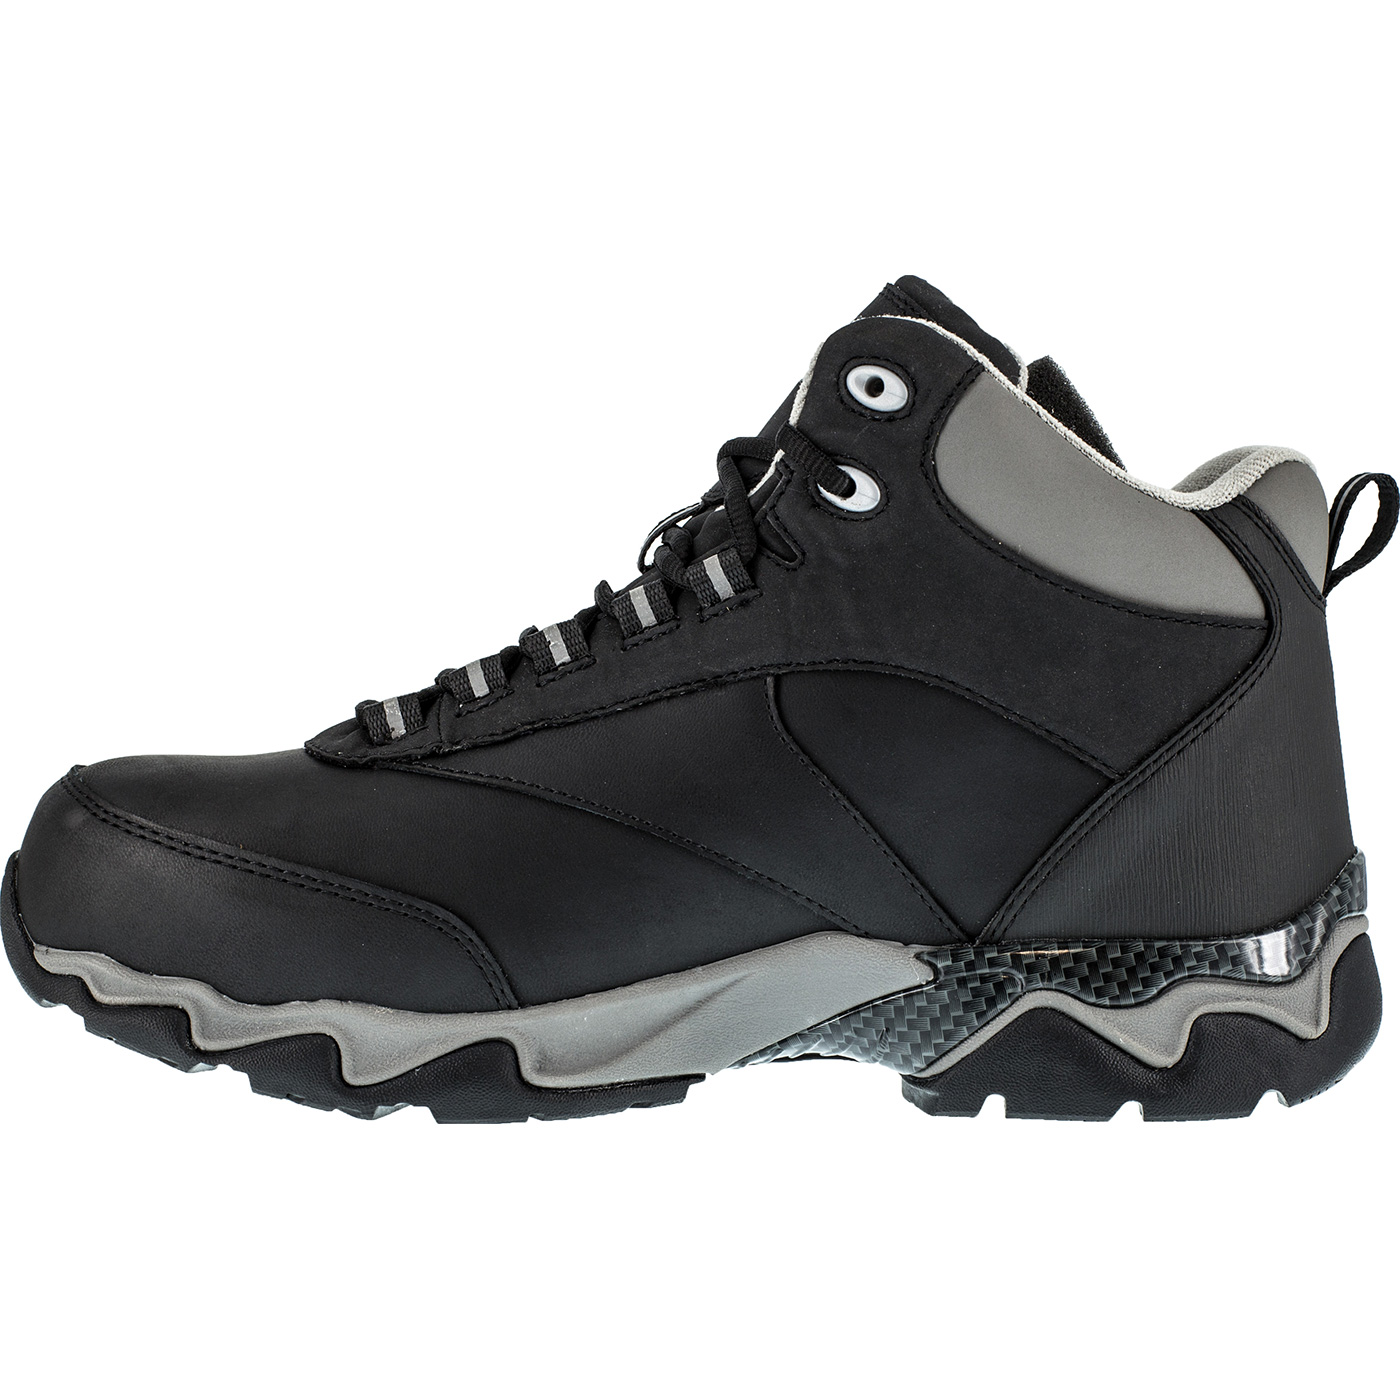 Reebok Work  Mens Beamer Mid Composite Toe Eh  Work Safety Shoes Casual - image 4 of 4